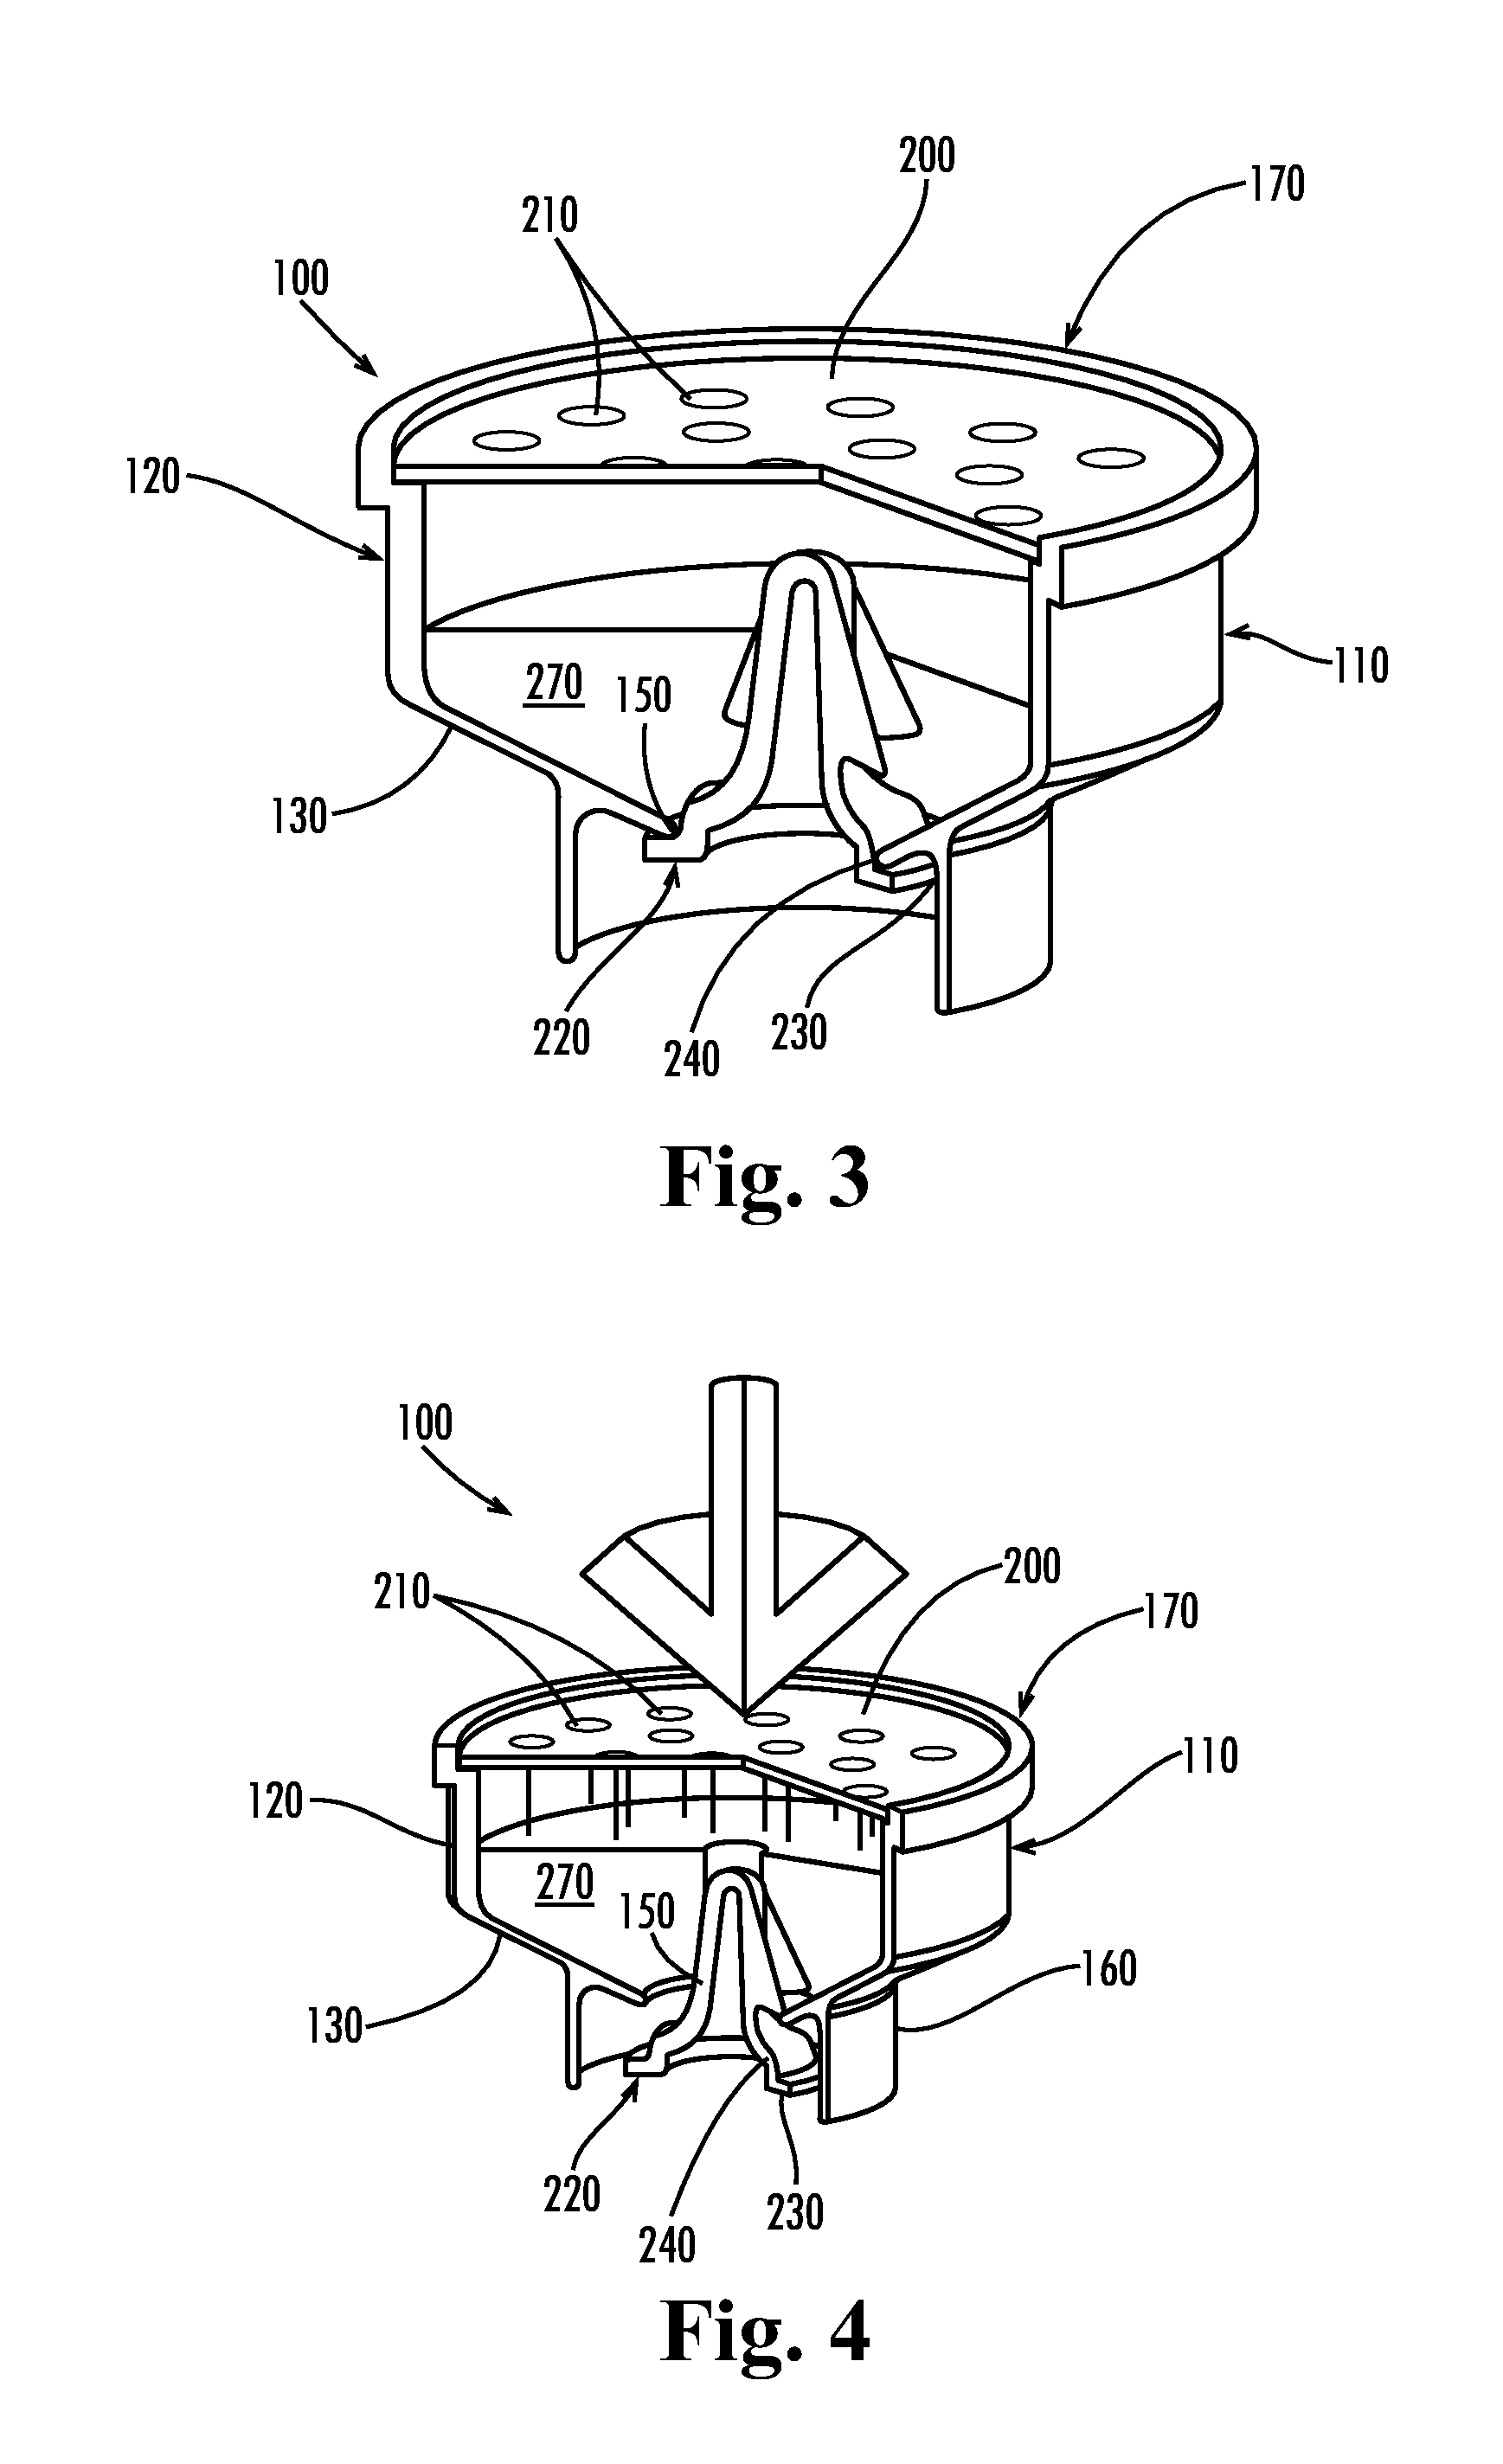 Method of sealing a pod for dispersible materials